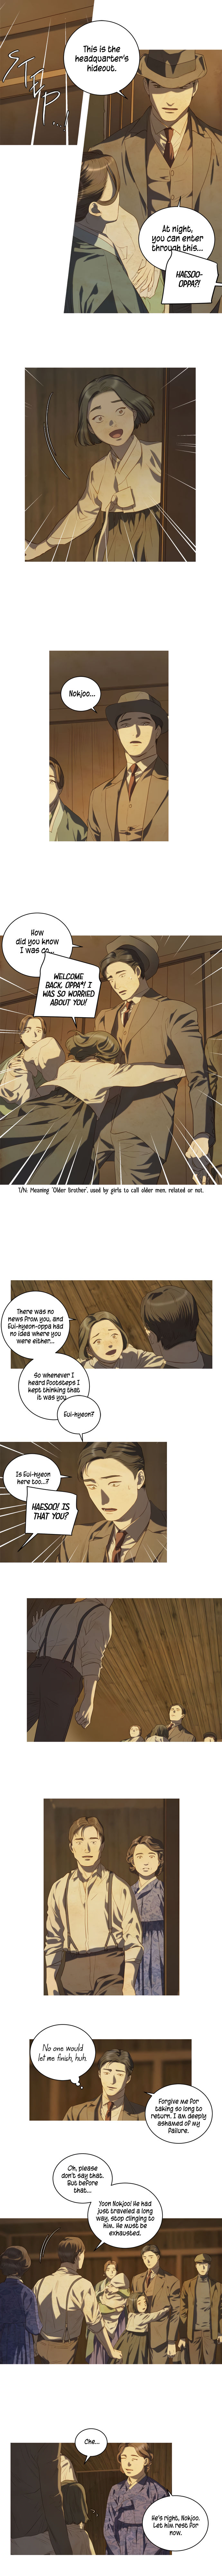 The Whale Star - The Gyeongseong Mermaid - Chapter 10 Page 6